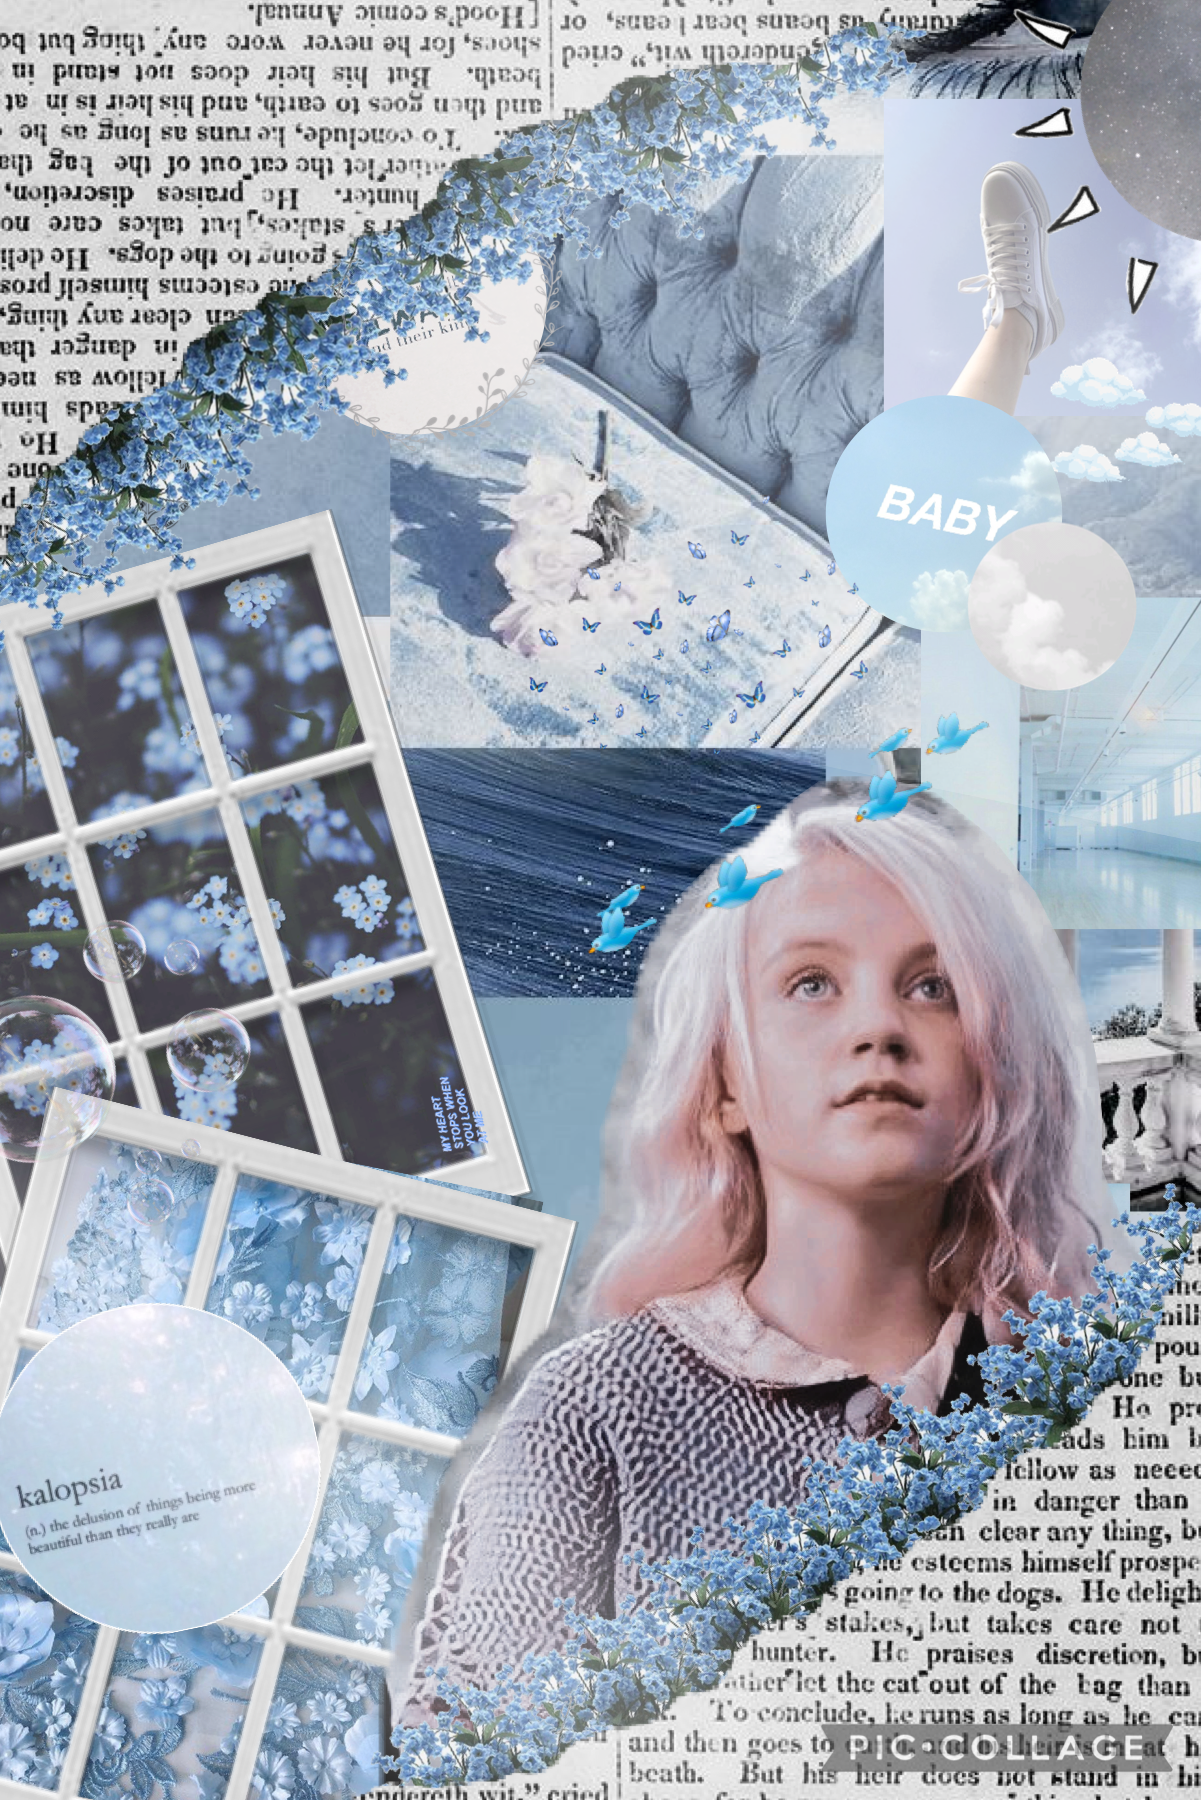 🌪tap🌪

Luna Lovegooddd💎🦋🤍
low key love and feel like i can relate to her, even though imma slytherin lol 
question-least favorite avenger?
answer-(unpopular opinion) it’s gotta be captain america